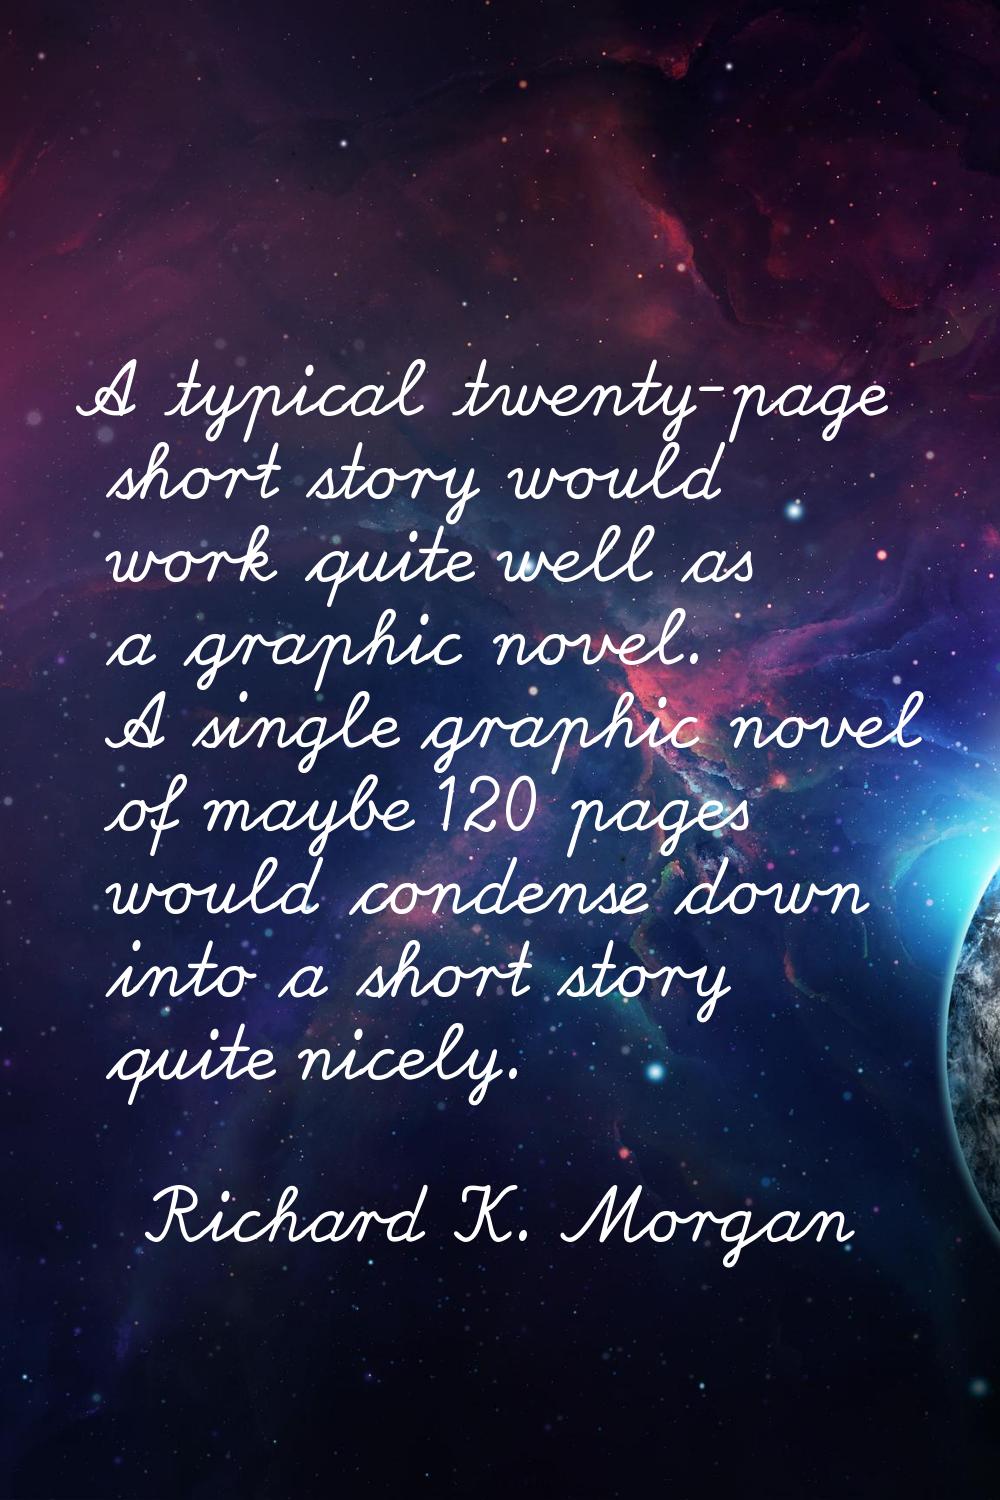 A typical twenty-page short story would work quite well as a graphic novel. A single graphic novel 